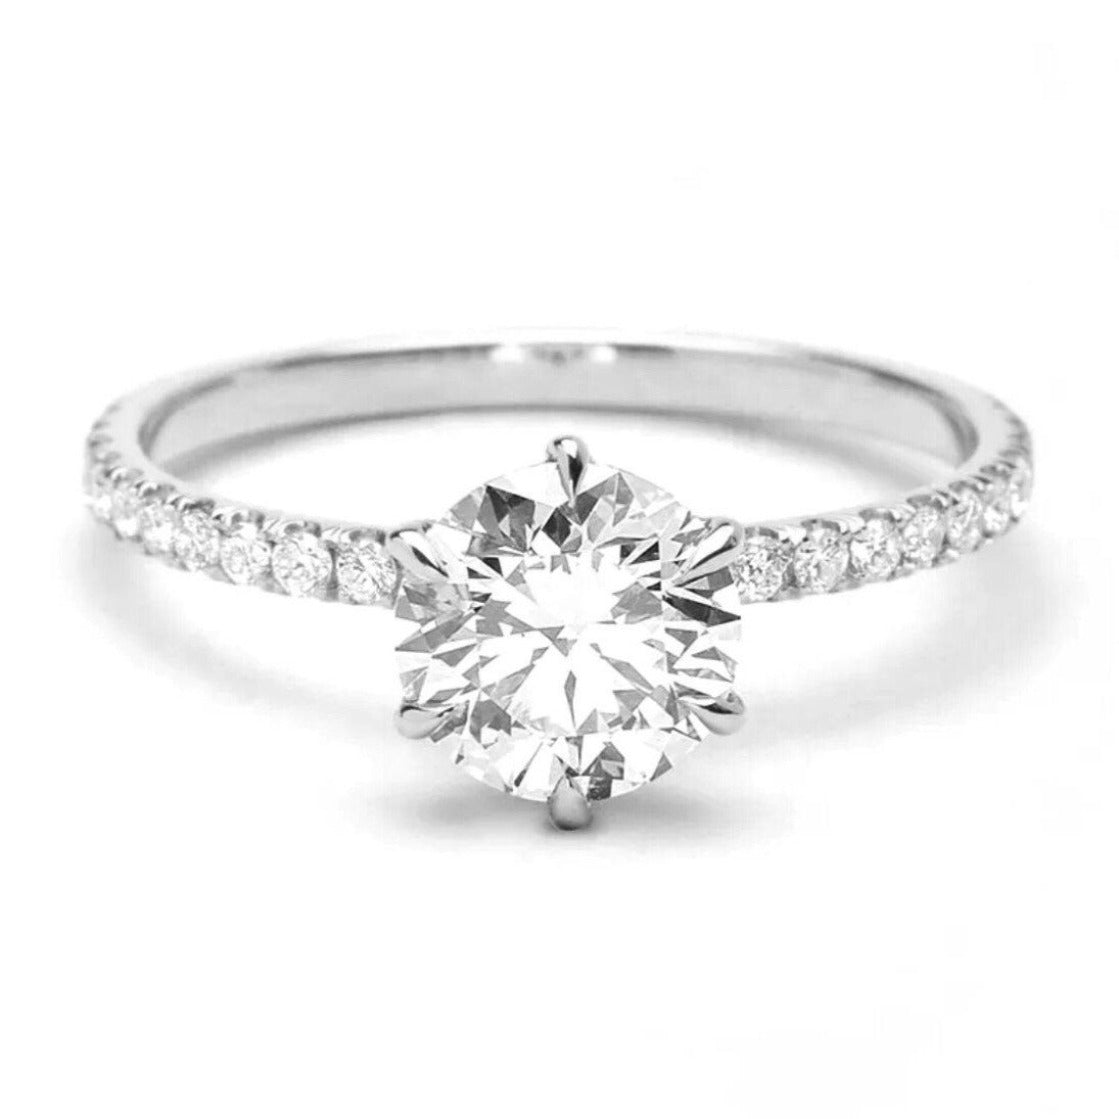 Solitaire Promise Ring with side stones/18K White Gold & Cubic Zirconia - infinityXinfinity.co.uk